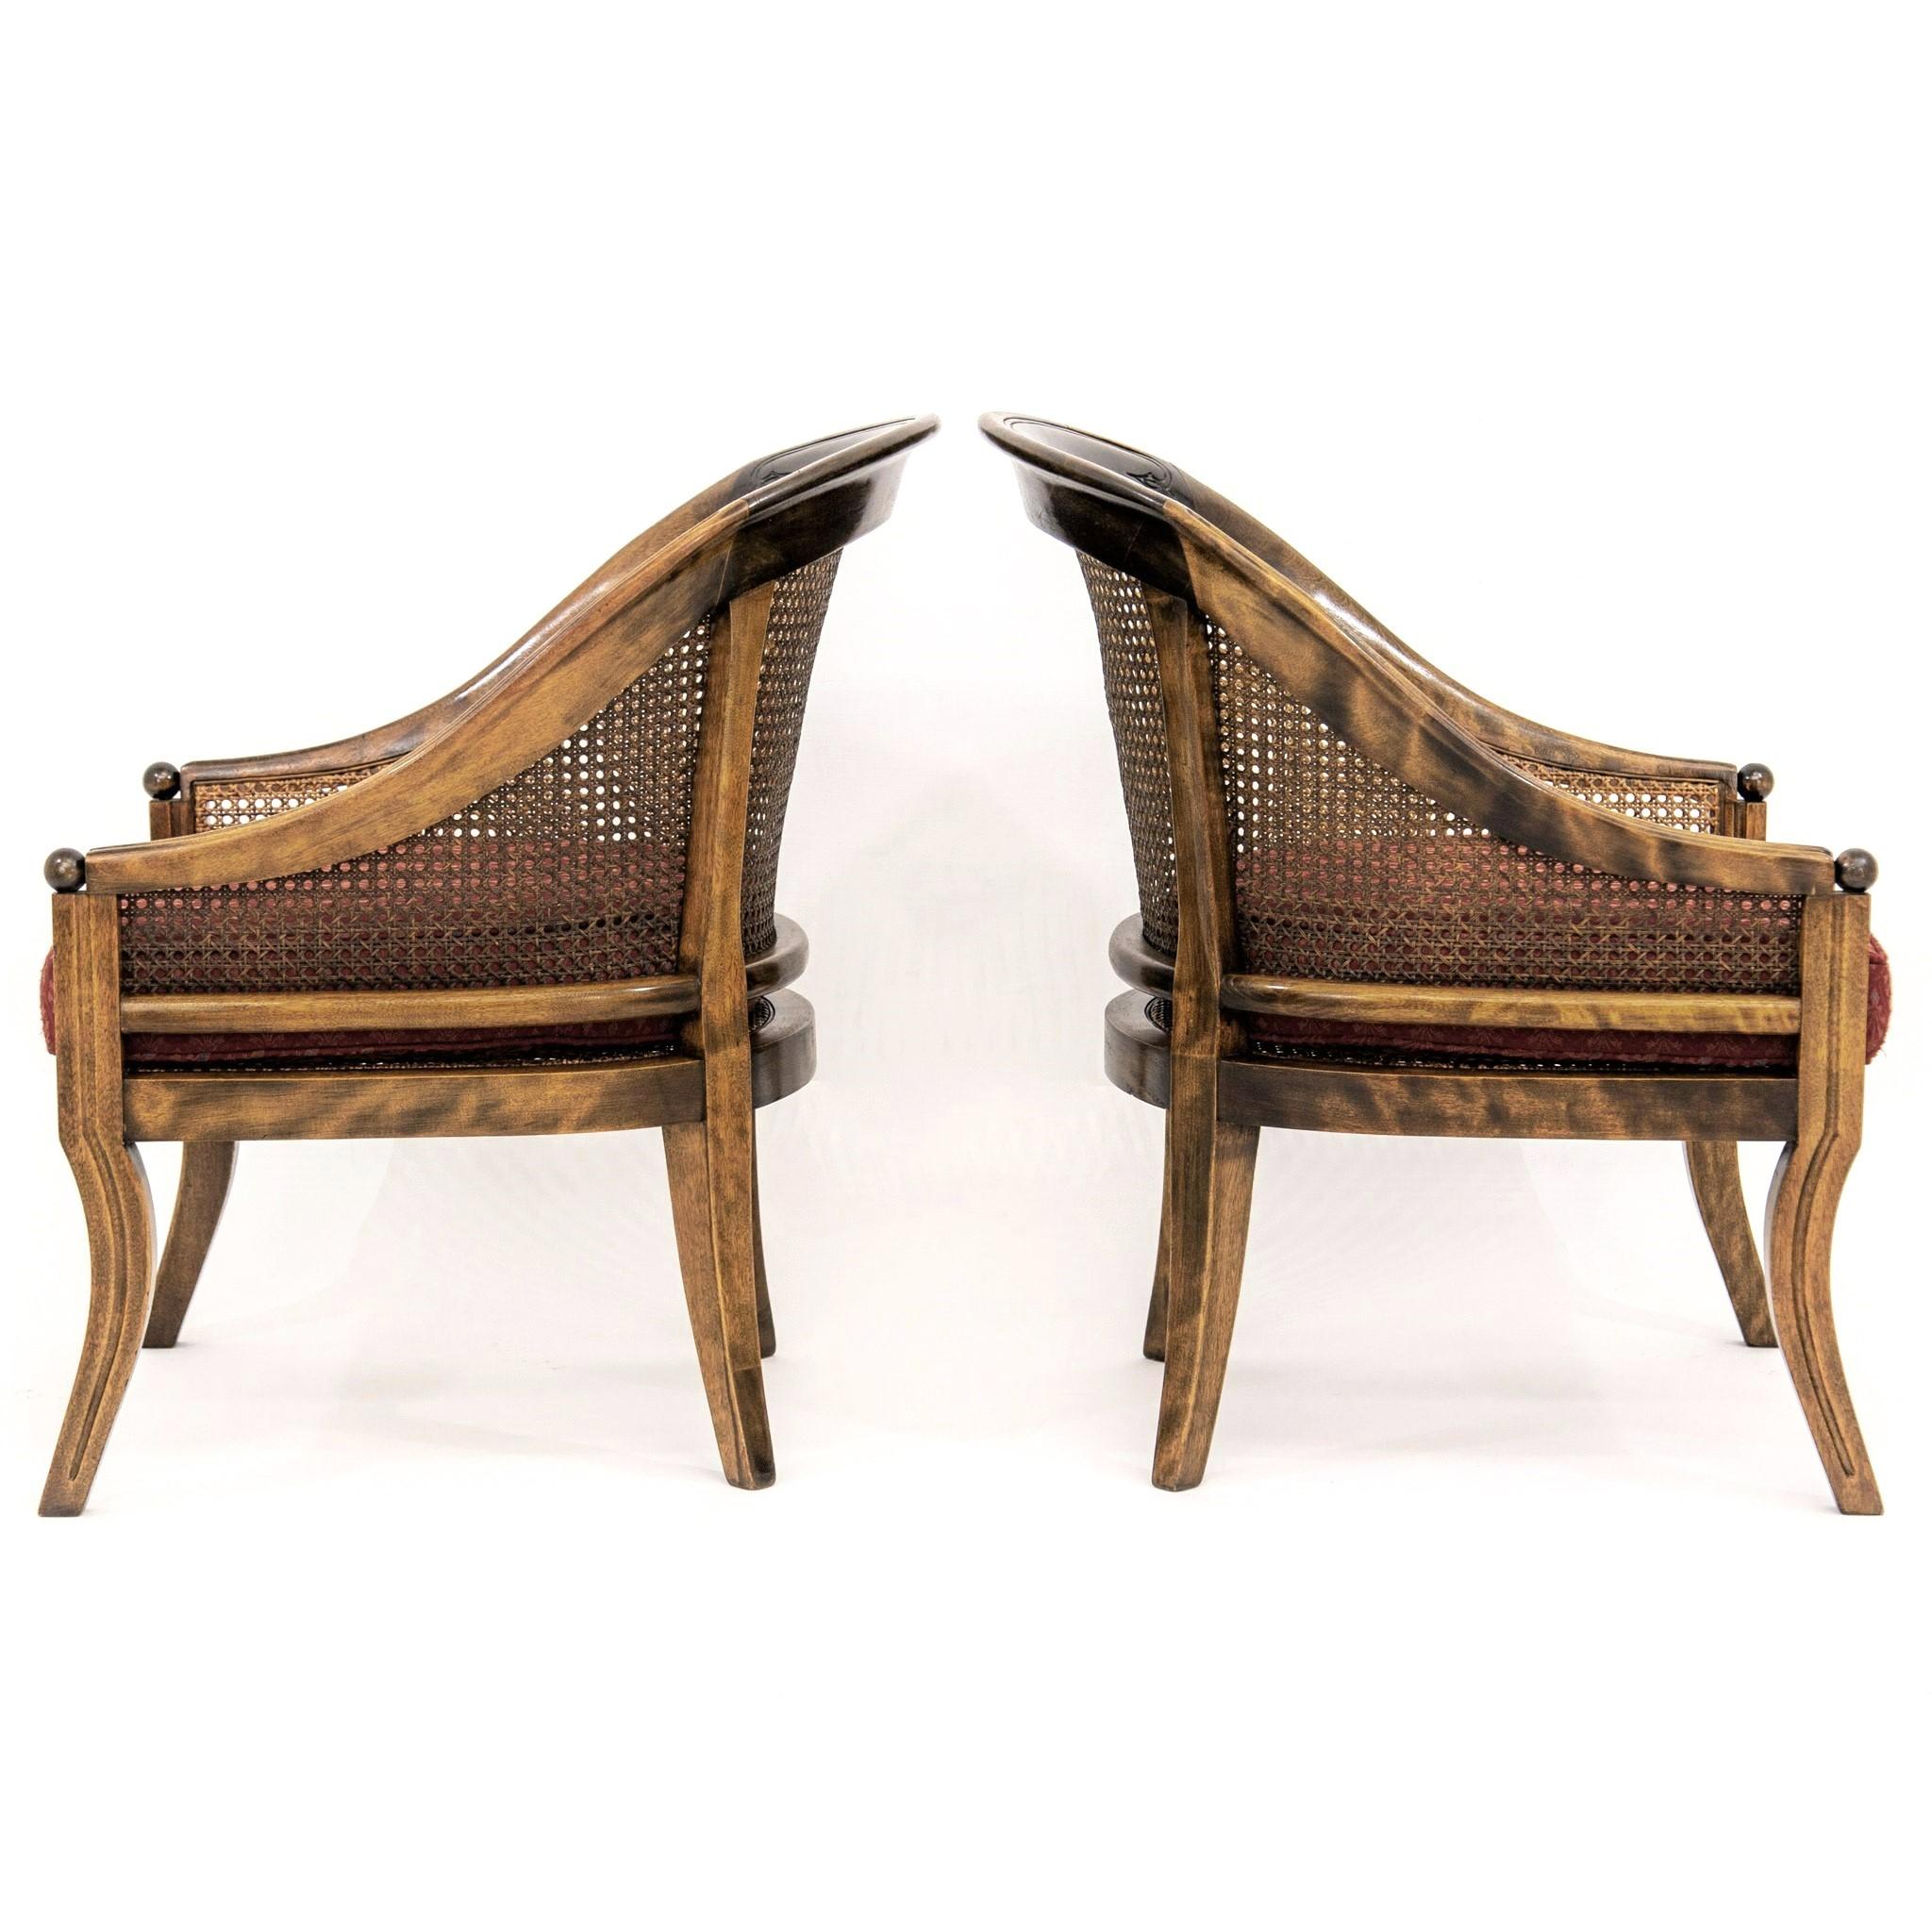 Pair of mid-20th century French Regency style swoop-arm spoon-back library chairs with caned backs, sides and seats raised on sabre legs. The frames are hand-stained with highly contrasting faux-graining lending an exotic and aged appearance. Each